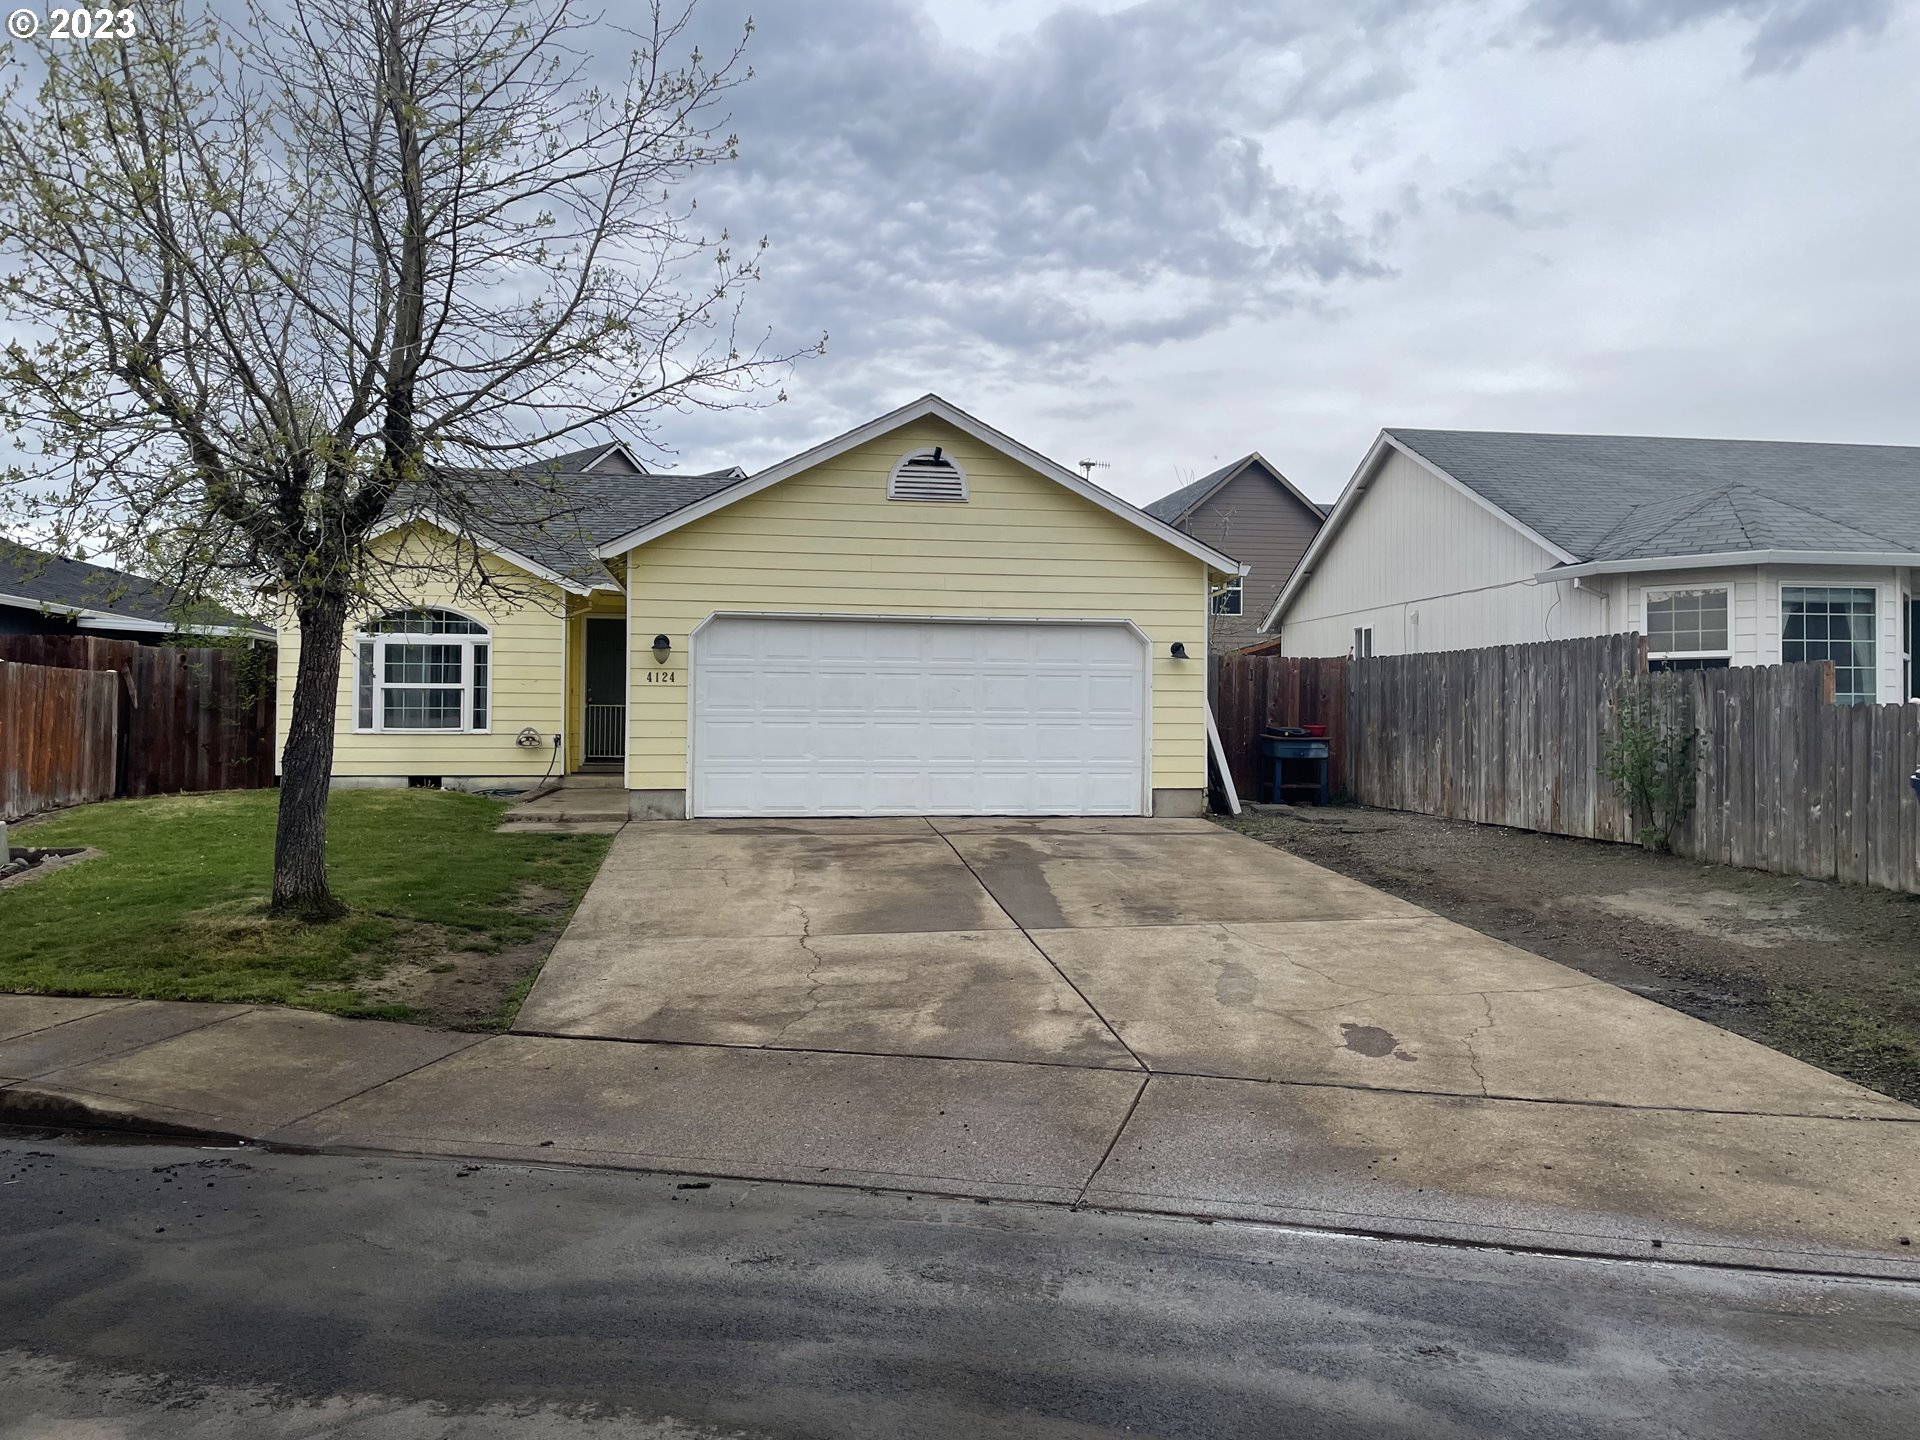 Perfect starter or downsizer home conveniently located to schools, shops and recreation. Room for RV, large kitchen, vaulted ceiling, patio and fenced yard. Come put your personal finishing touches on this affordable home that you can call your own.